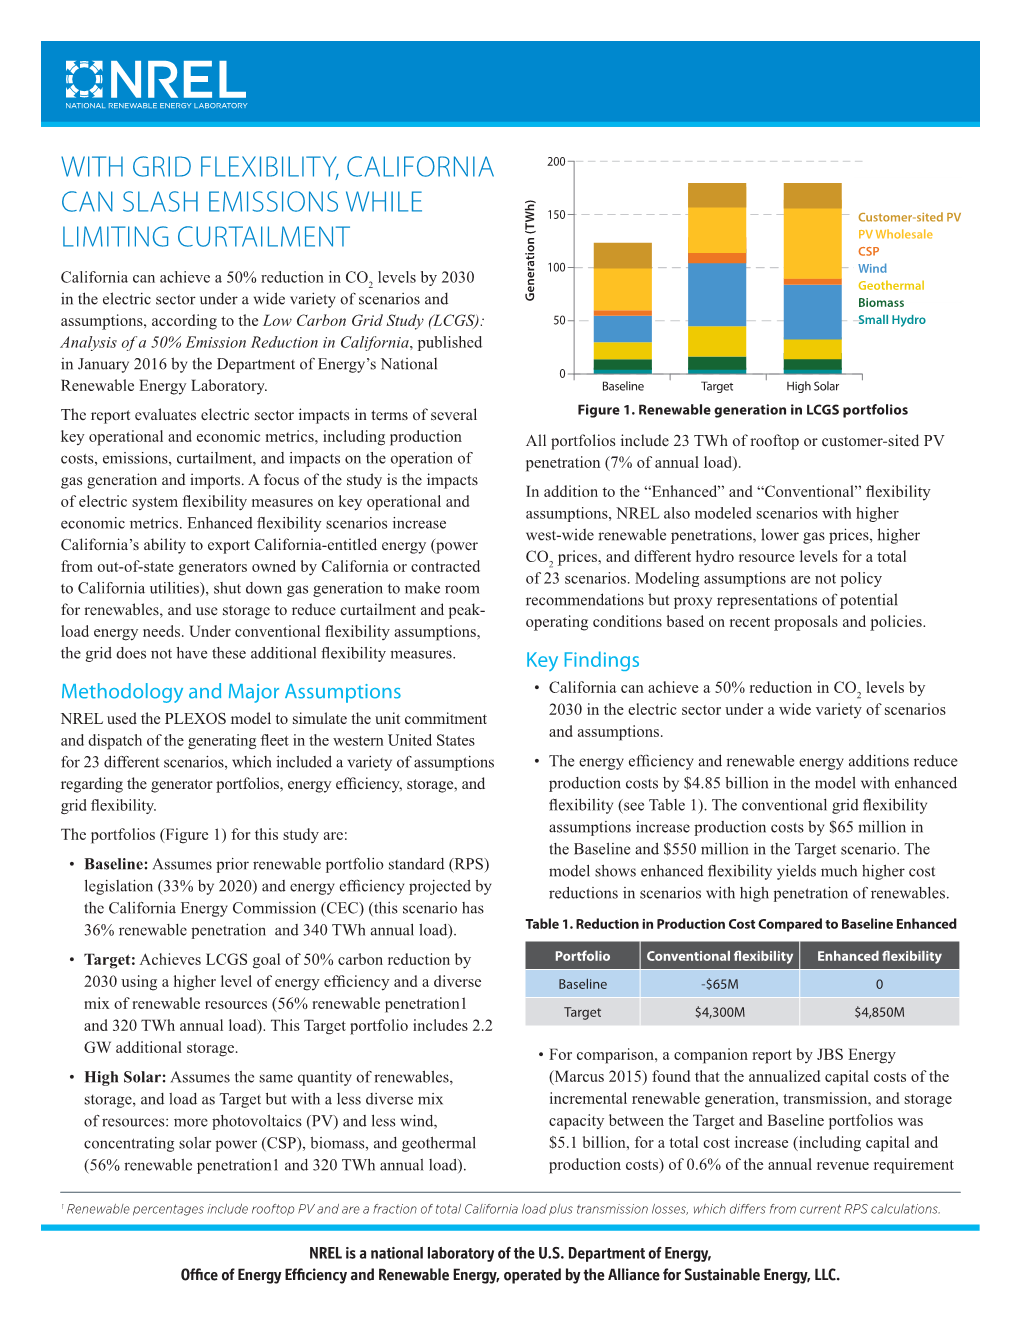 With Grid Flexibility, California Can Slash Emissions While Limiting Curtailment (Fact Sheet), NREL (National Renewable Energy L